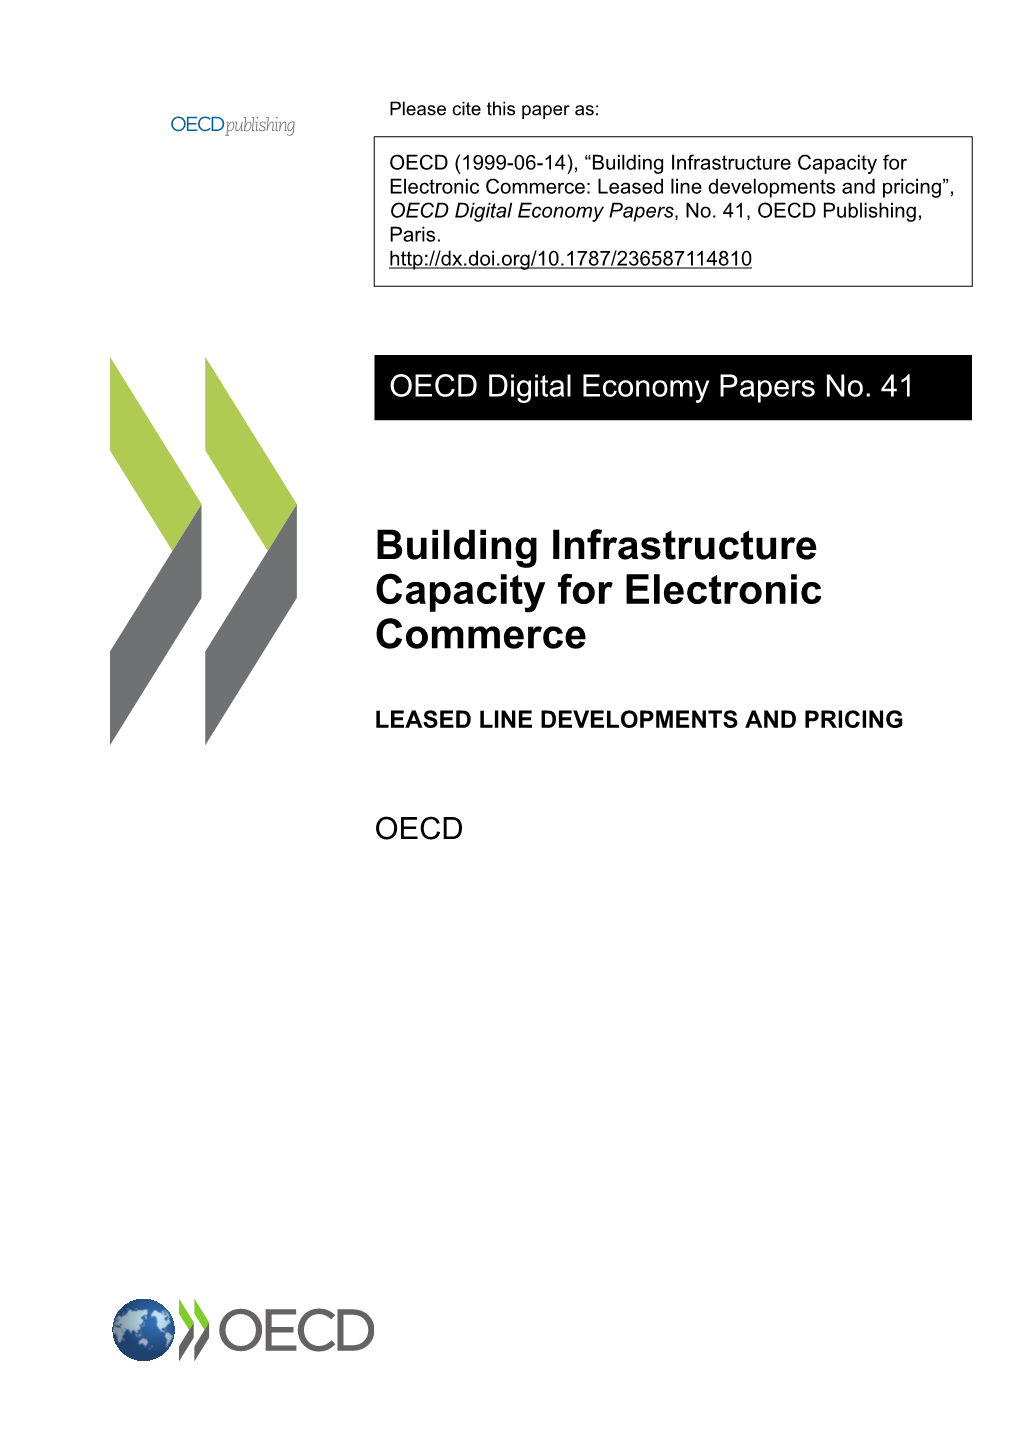 Building Infrastructure Capacity for Electronic Commerce: Leased Line Developments and Pricing”, OECD Digital Economy Papers, No